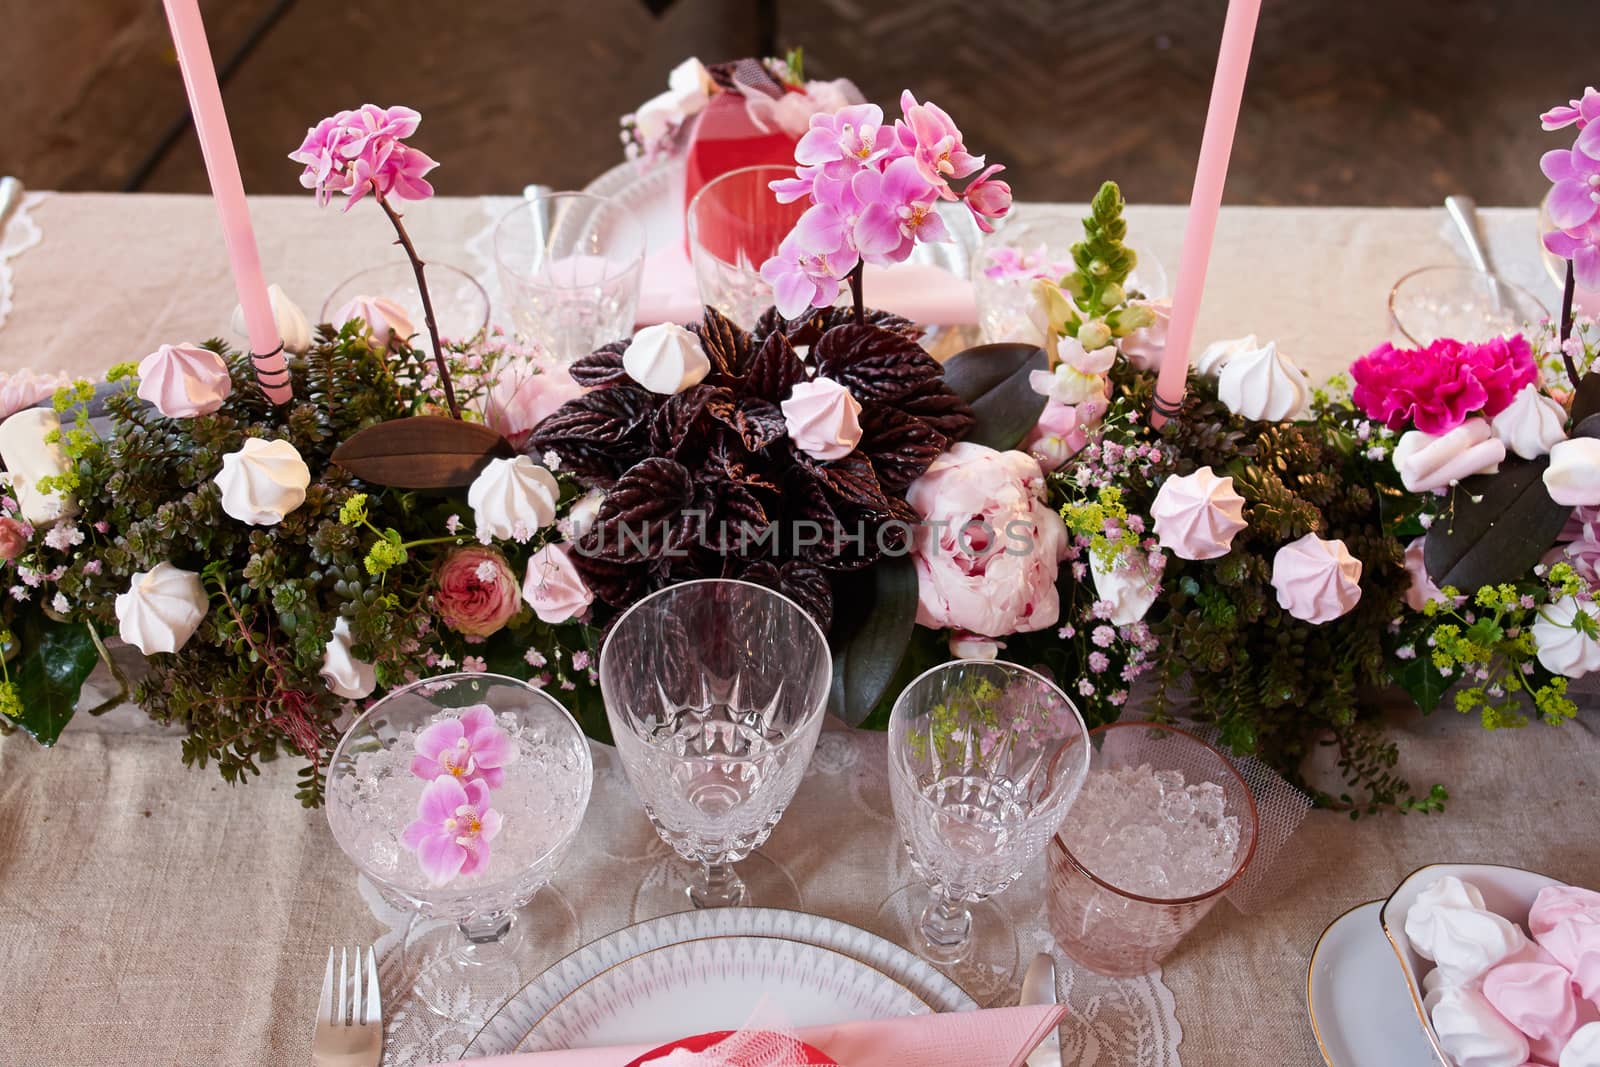 Festive wedding table setting by Ronyzmbow